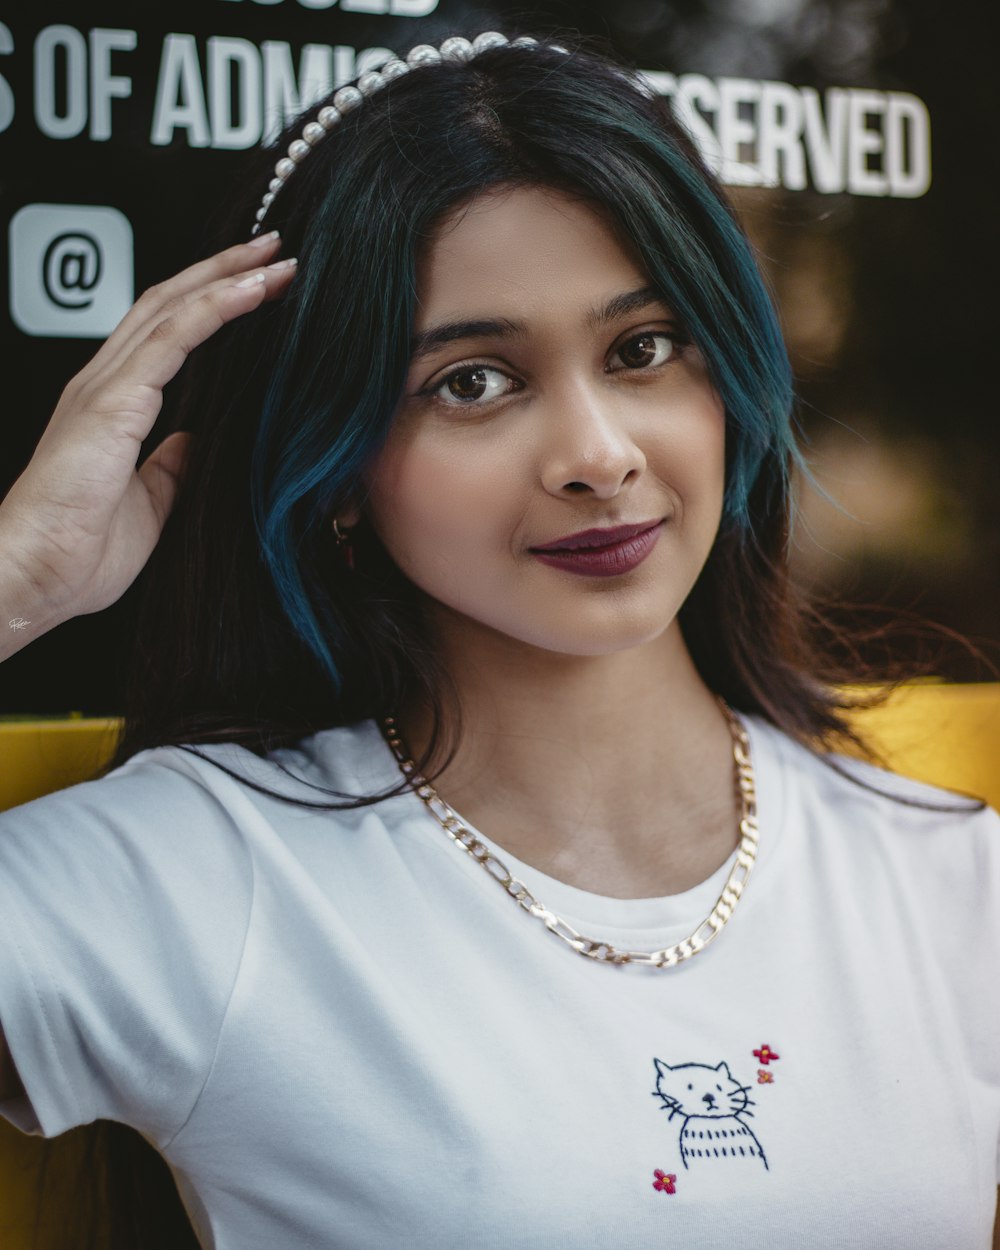 a woman with blue hair wearing a white shirt